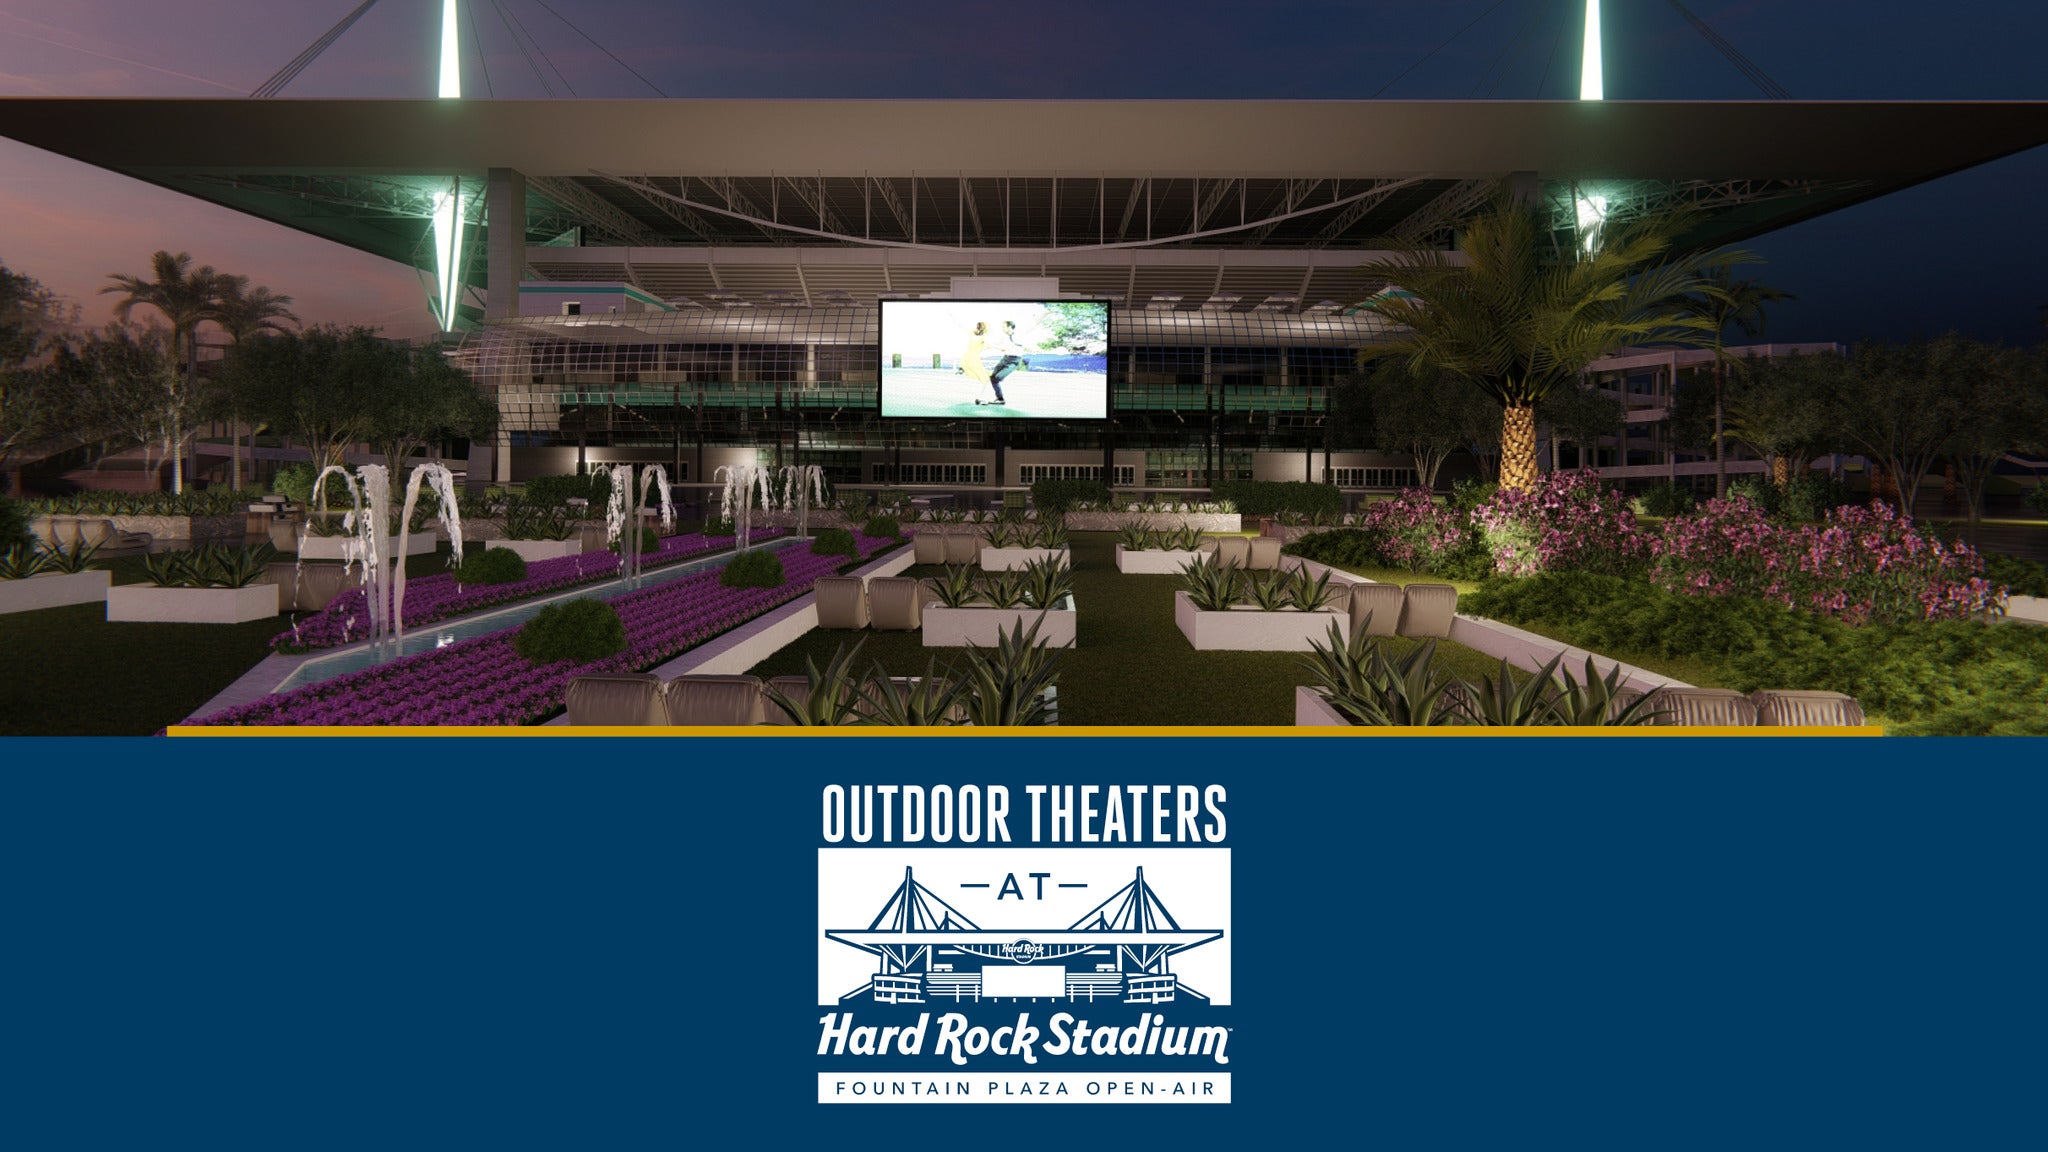 Fountain Plaza Theater: Yesterday in Miami promo photo for Hard Rock Stadium Members presale offer code